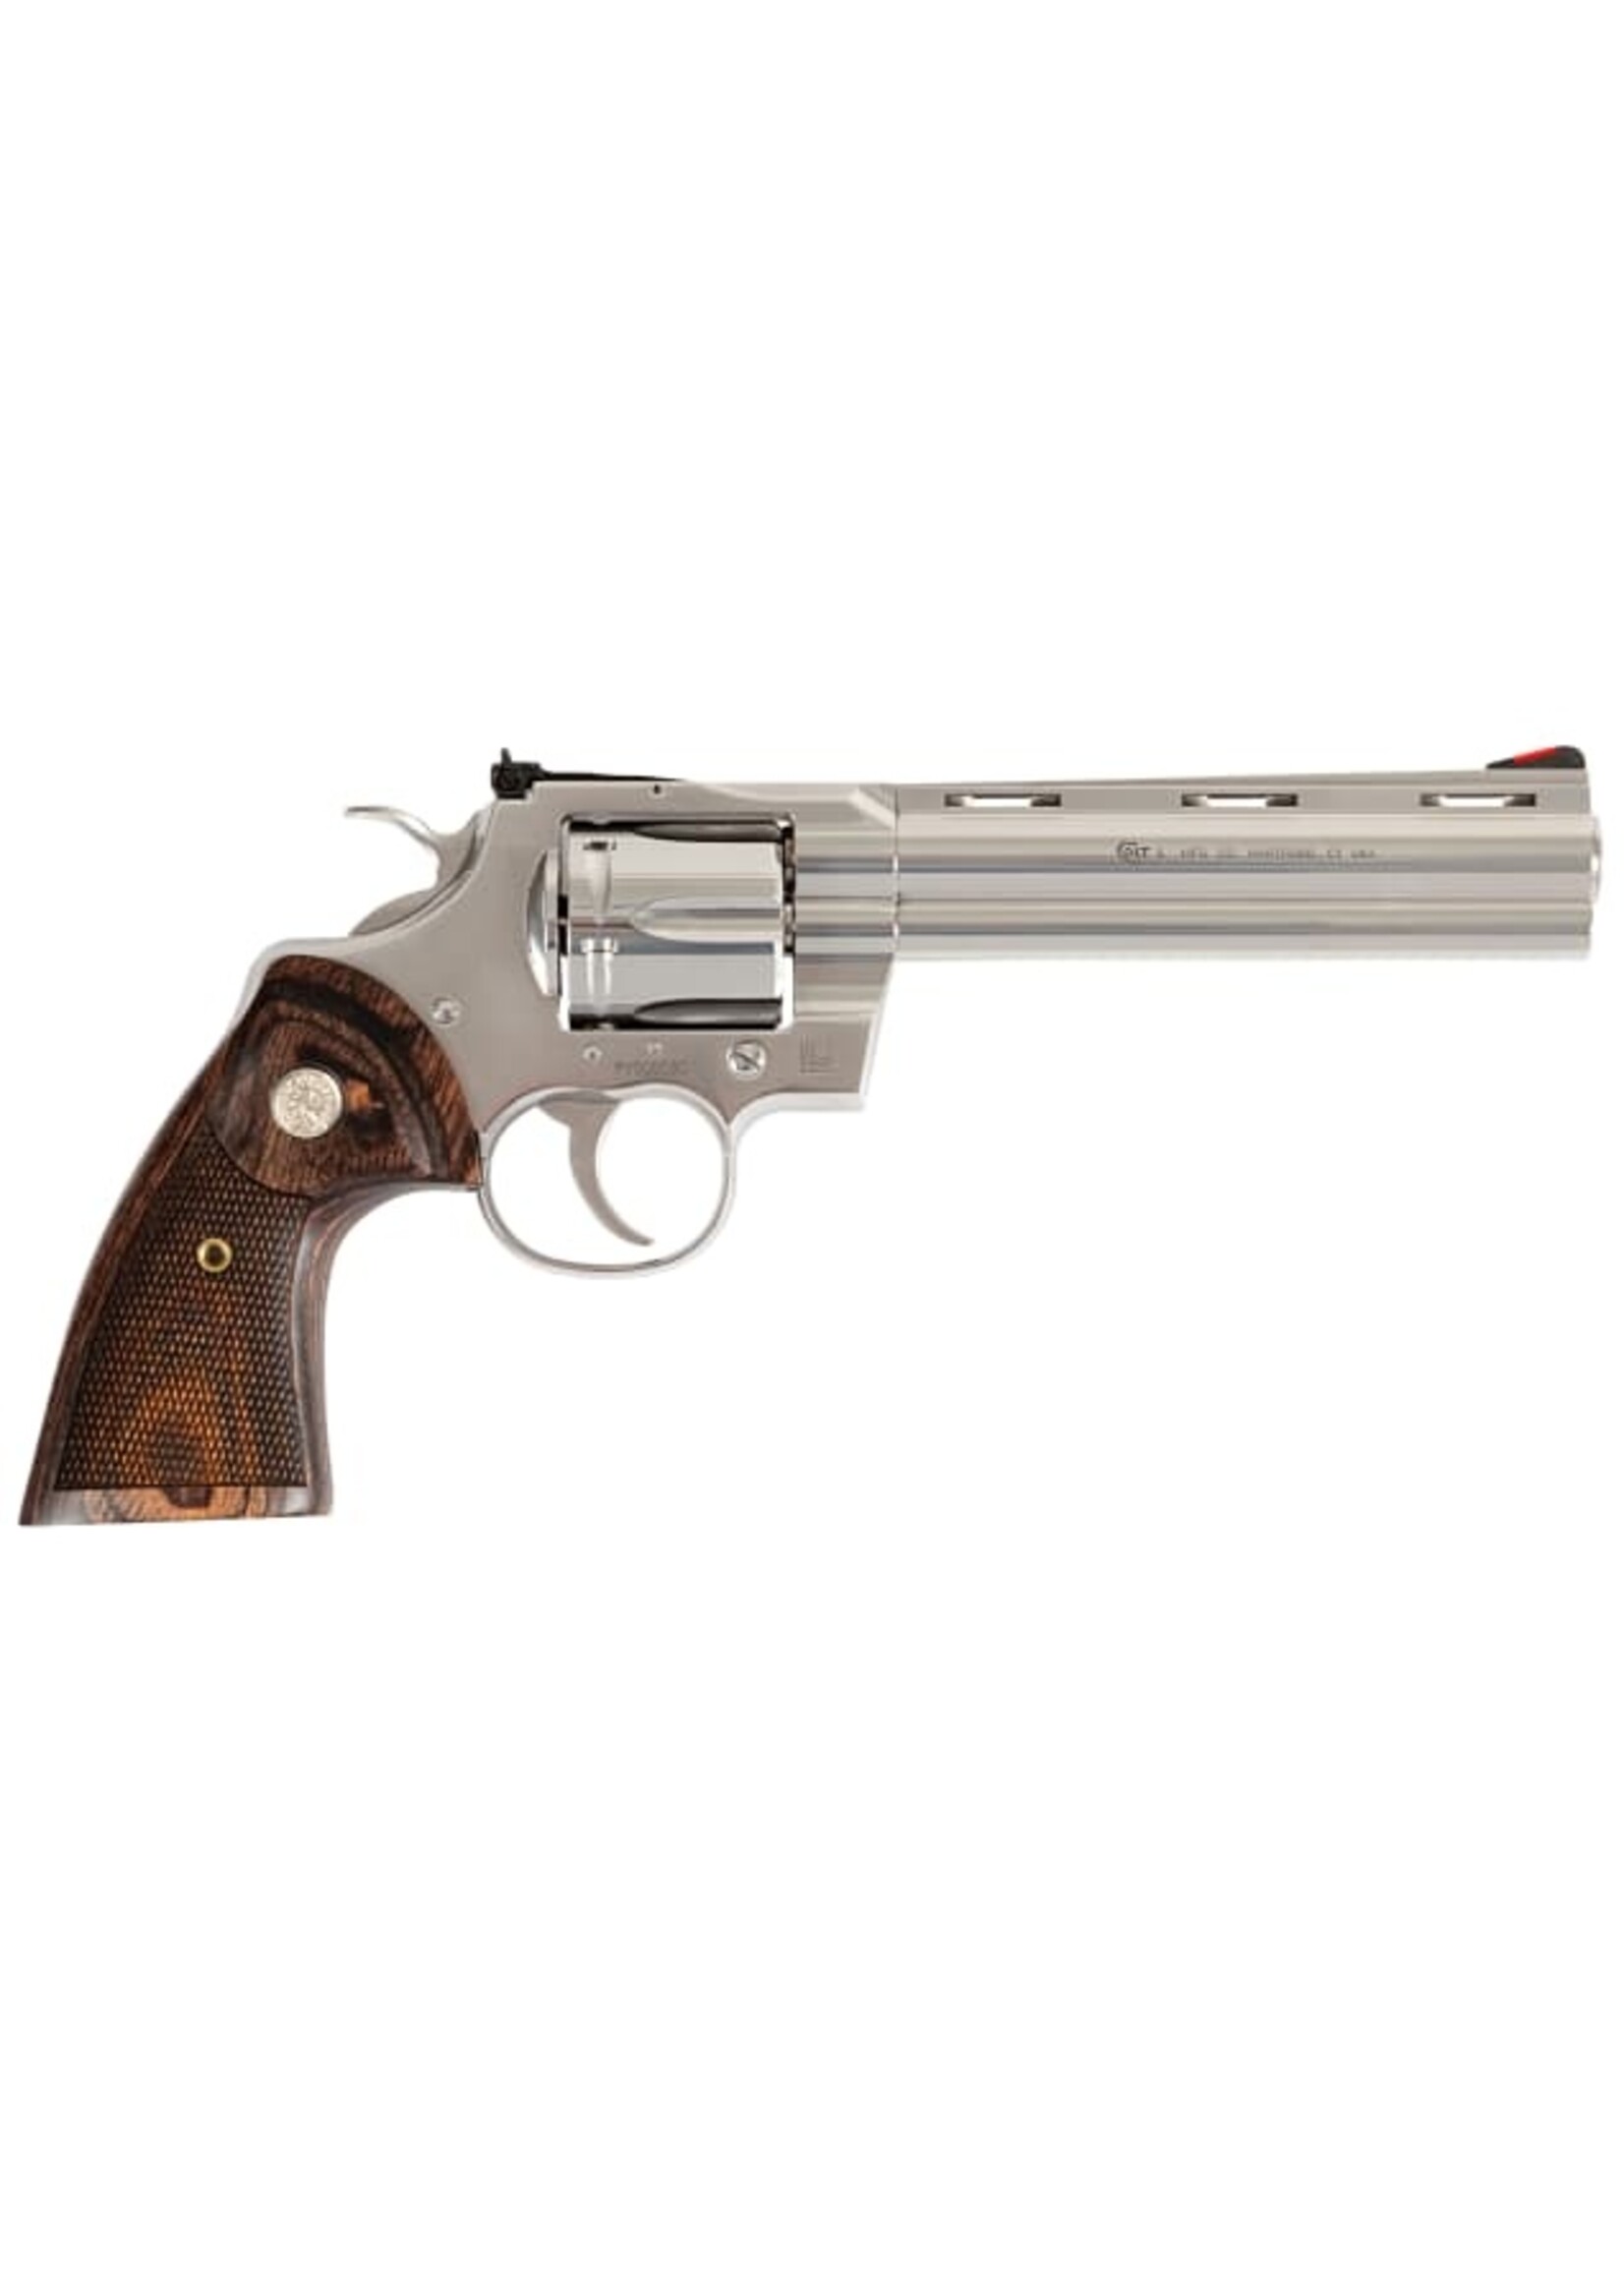 Colt Mfg Colt's Manufacturing, Python, Revolver, Double Action Only, 357 Magnum, 6" Barrel, Steel, Stainless Finish, Walnut Grips, Red Ramp Front/Adjustable Rear Sight, 6 Rounds